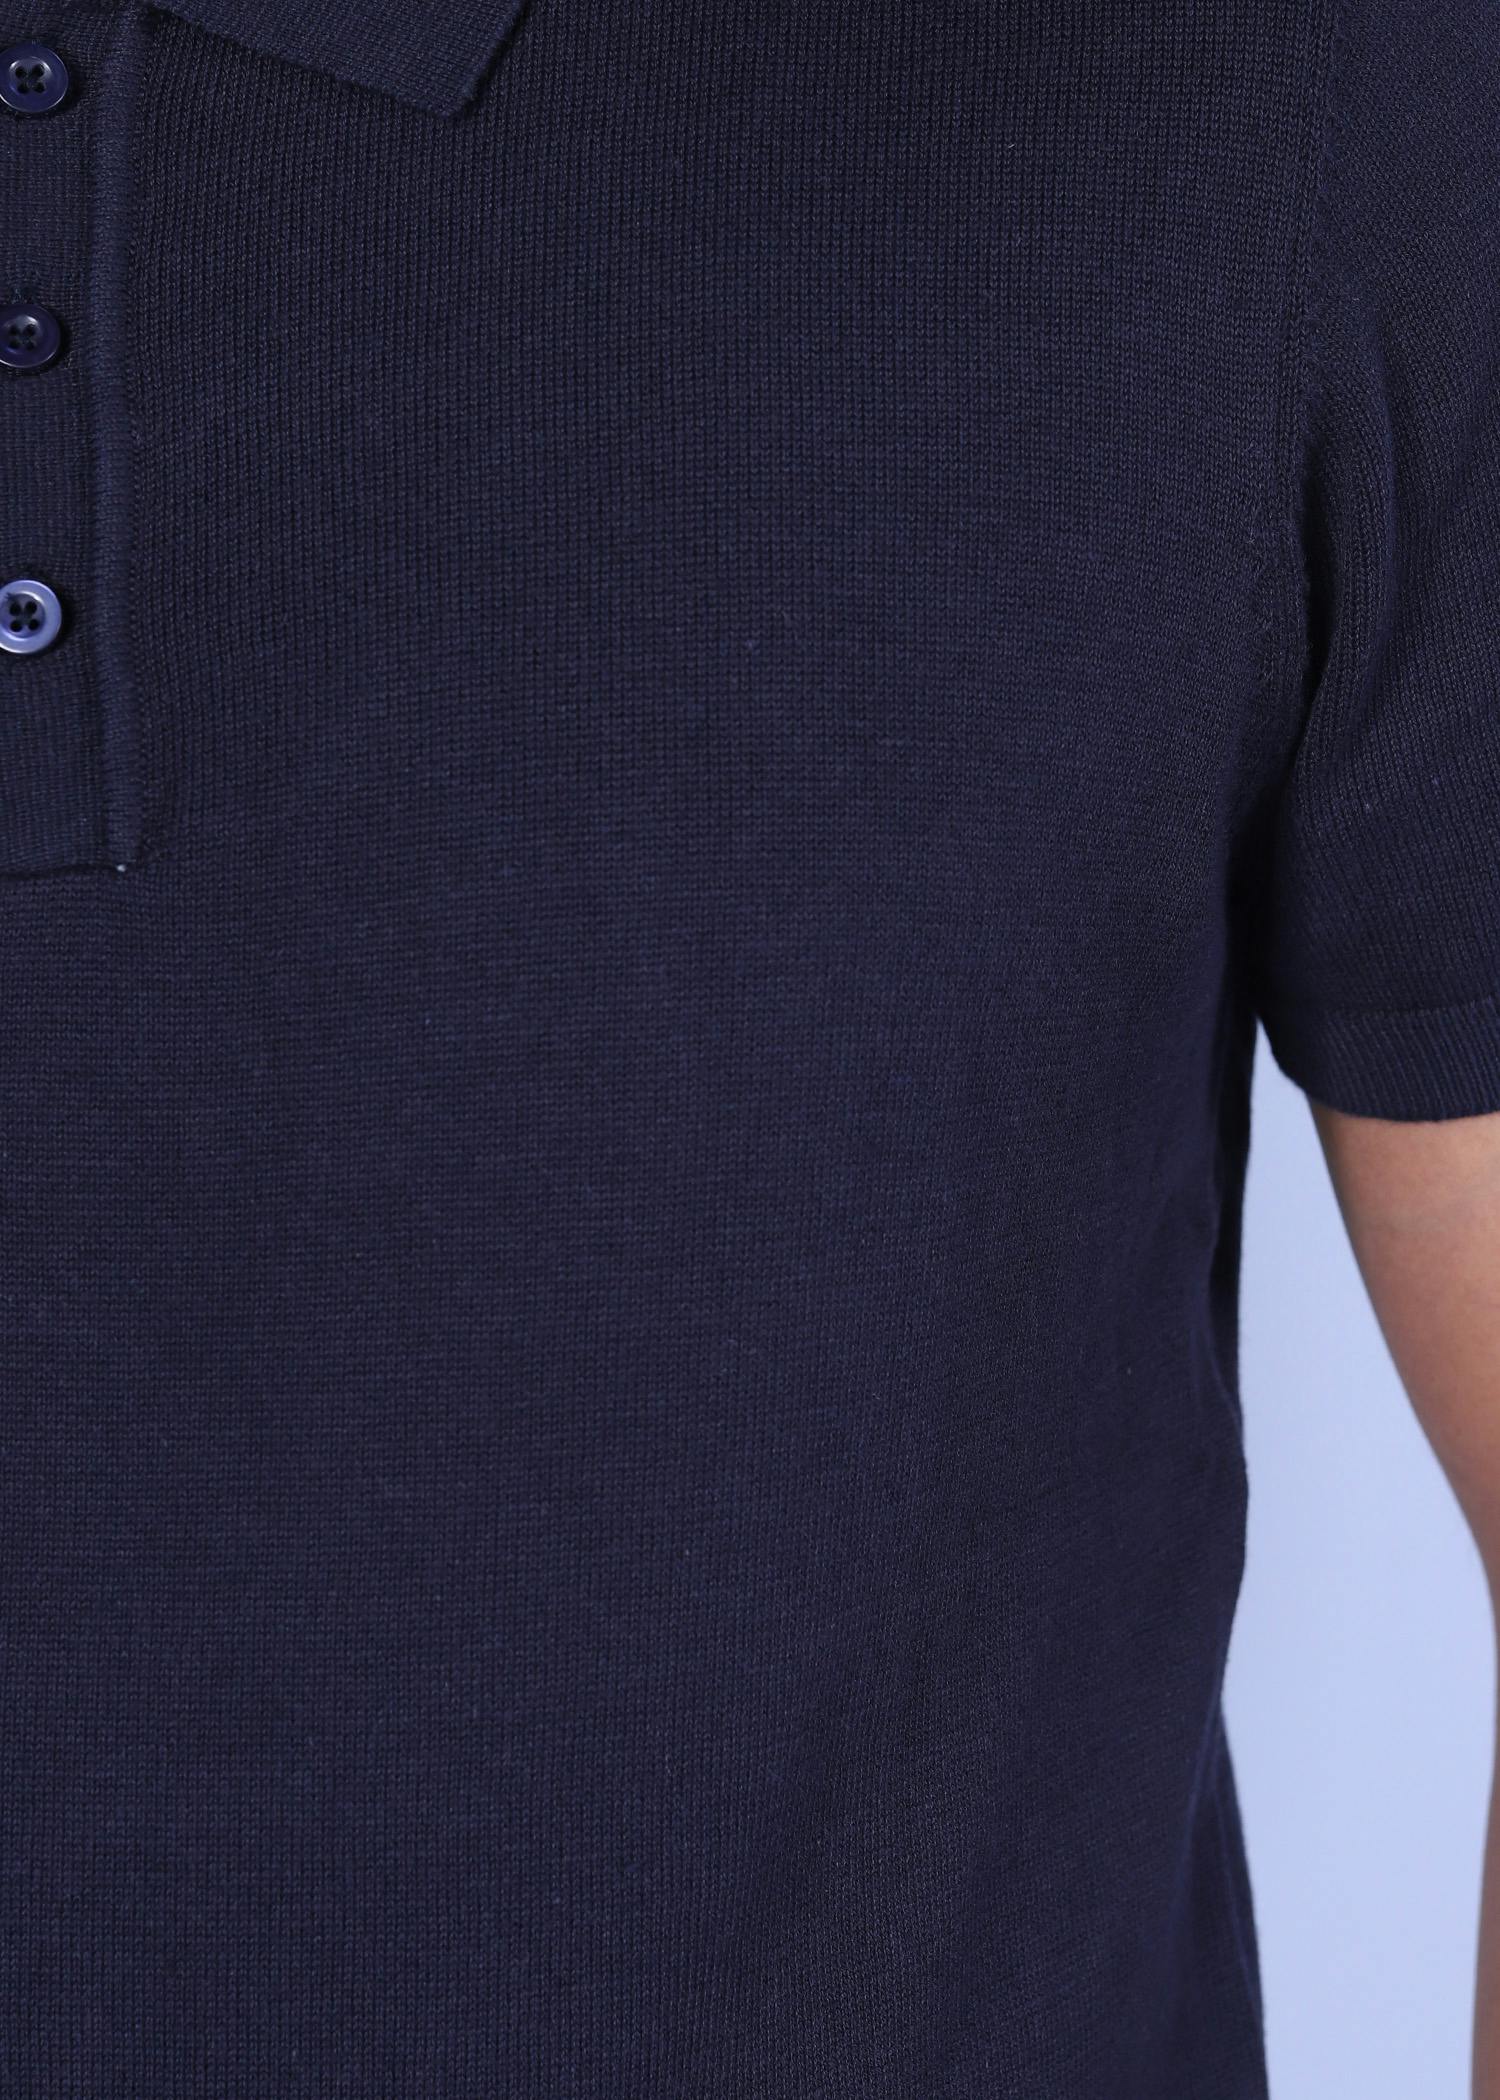 nightingale viii polo navy color close front view